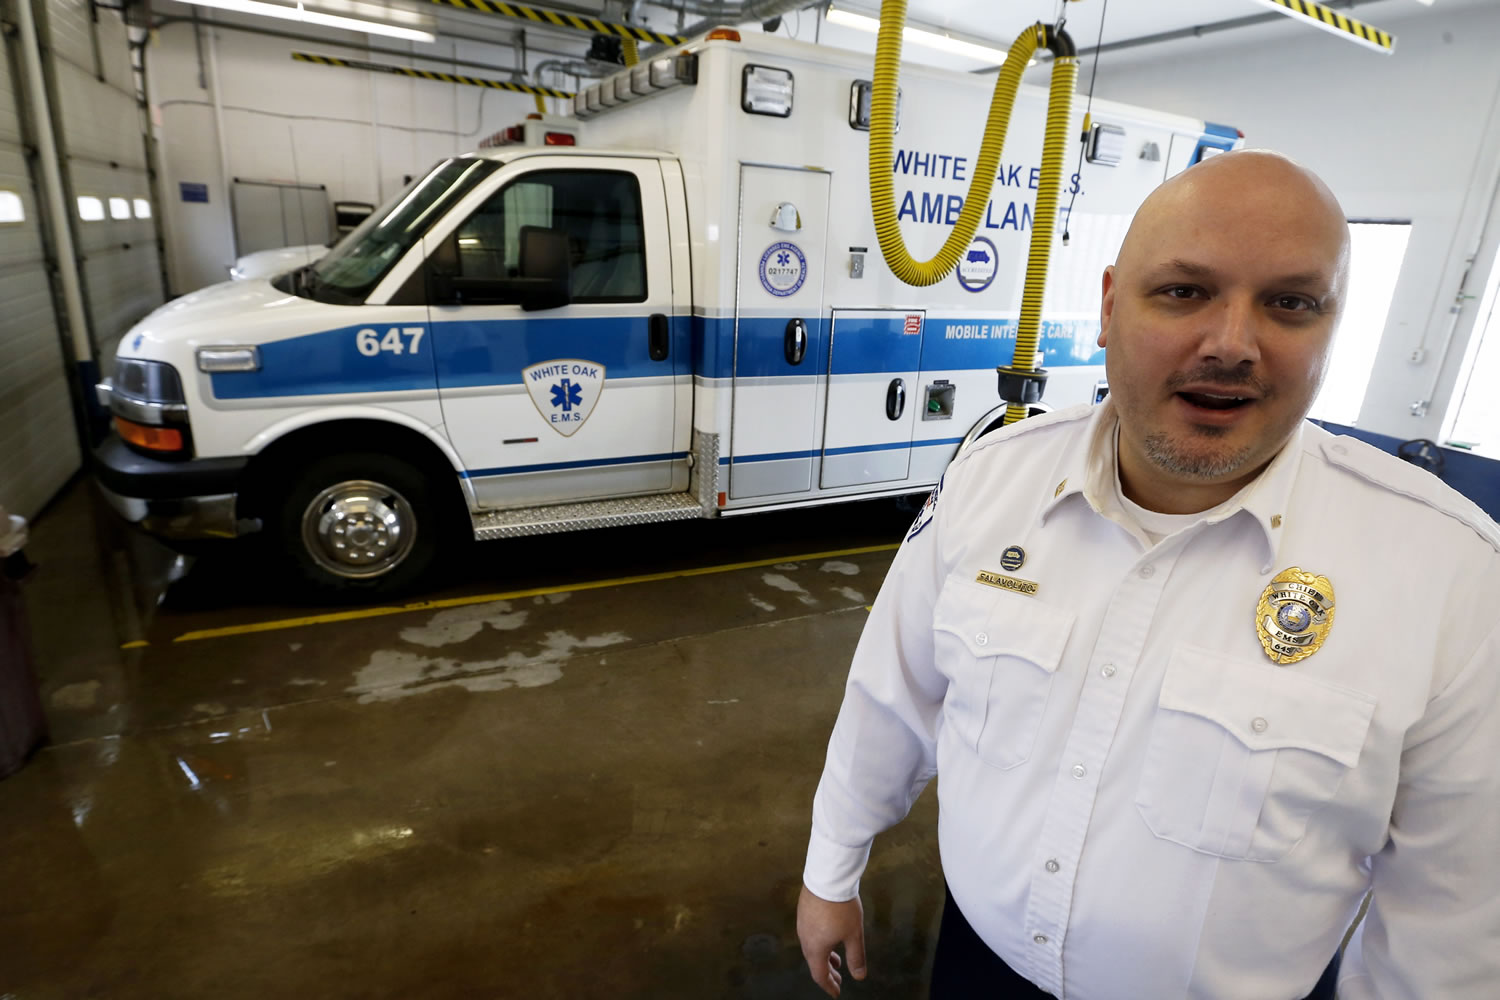 Changes in weather are important for Paul Falavolito's nonprofit ambulance service, and he was outraged when he flipped on DirecTV's weather service, WeatherNation TV, and it was broadcasting a seven-day forecast for Los Angeles while he was in the Northeast.